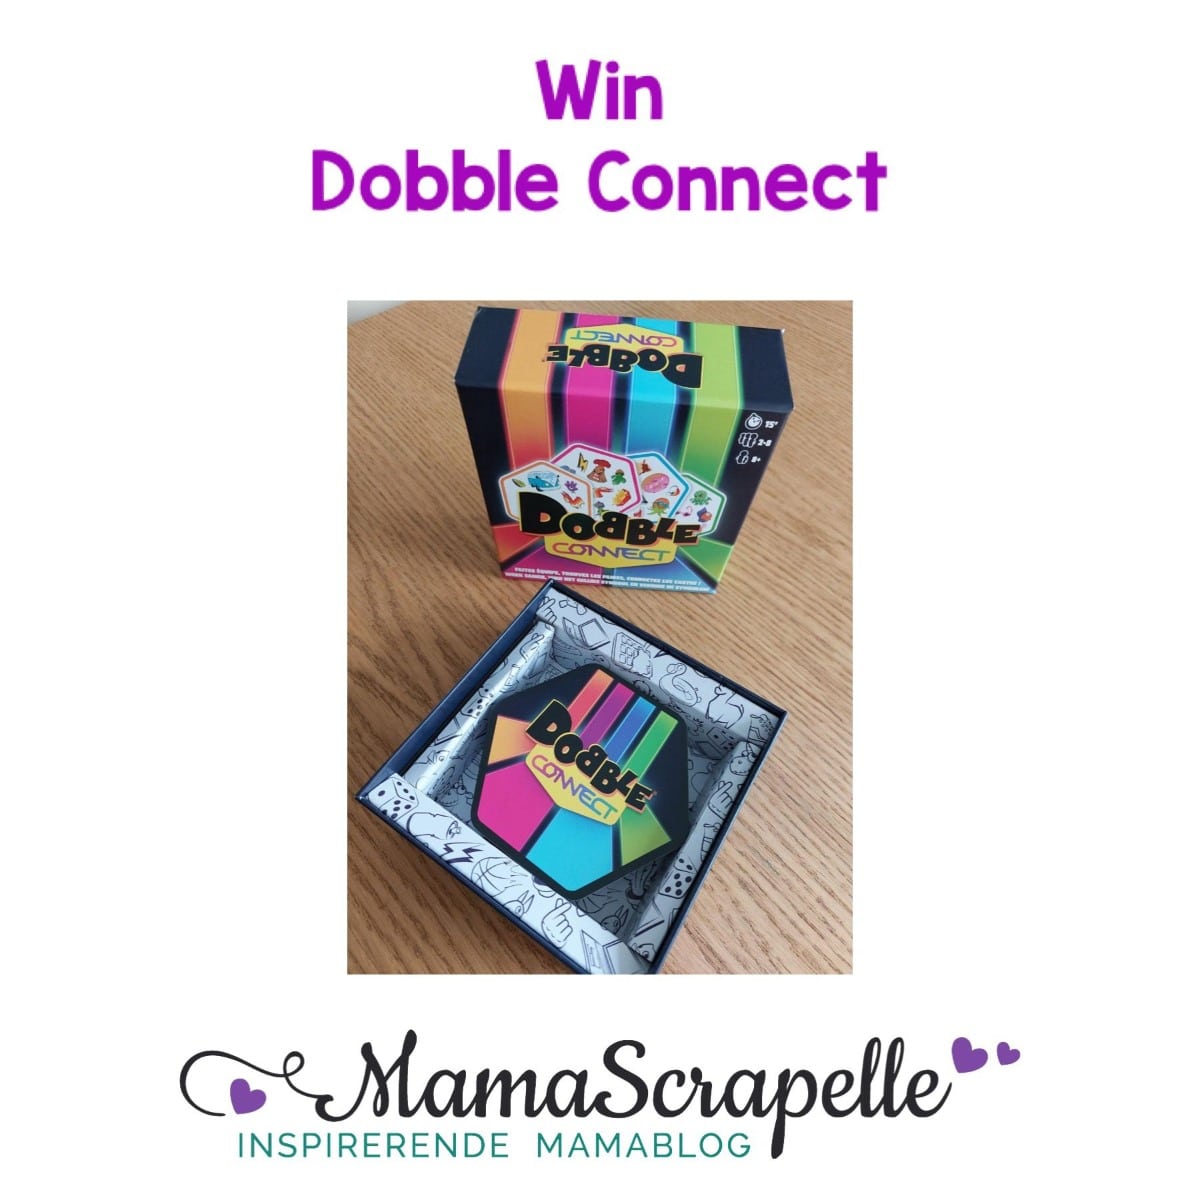 win Dobble connect